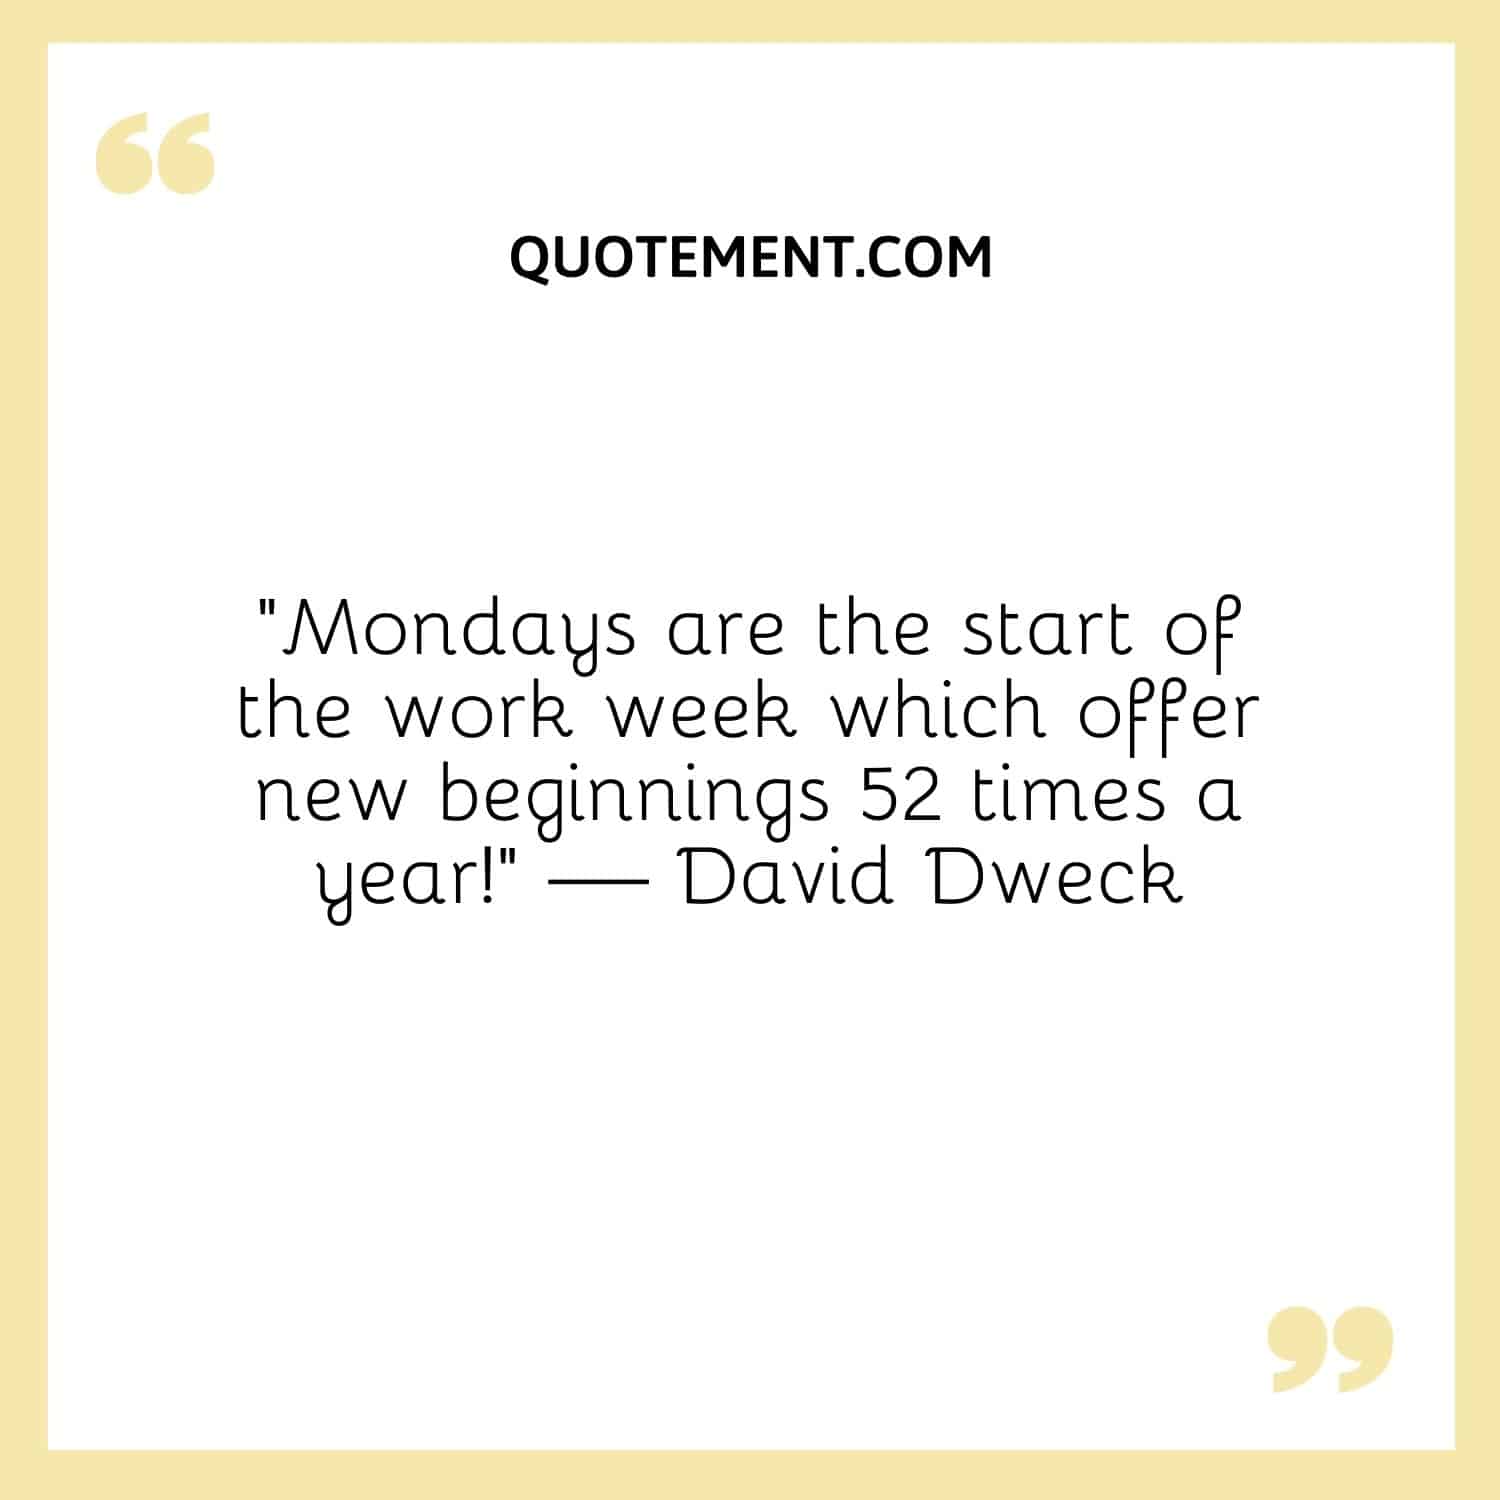 Mondays are the start of the work week